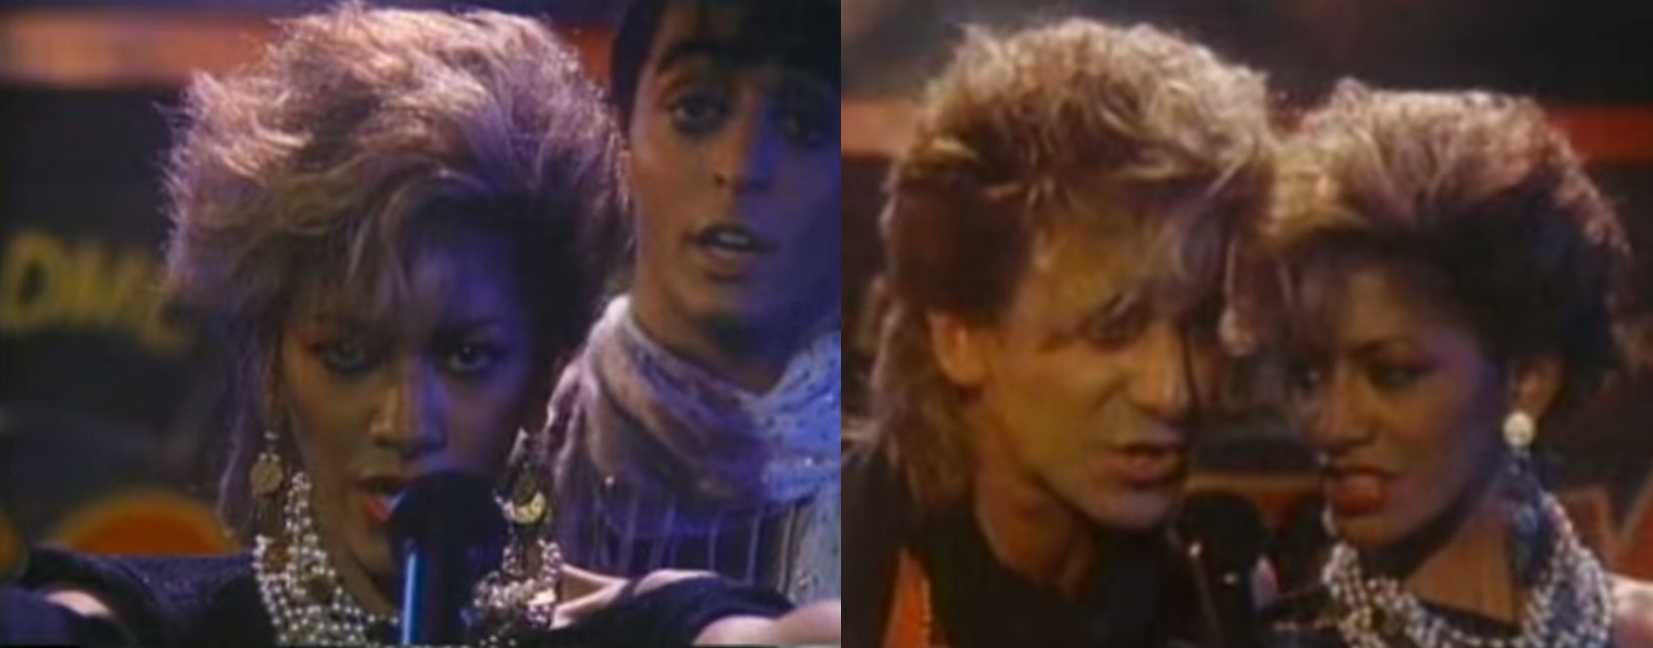 Lip-synchin'  Prince's  vocals for the original music video.jpg